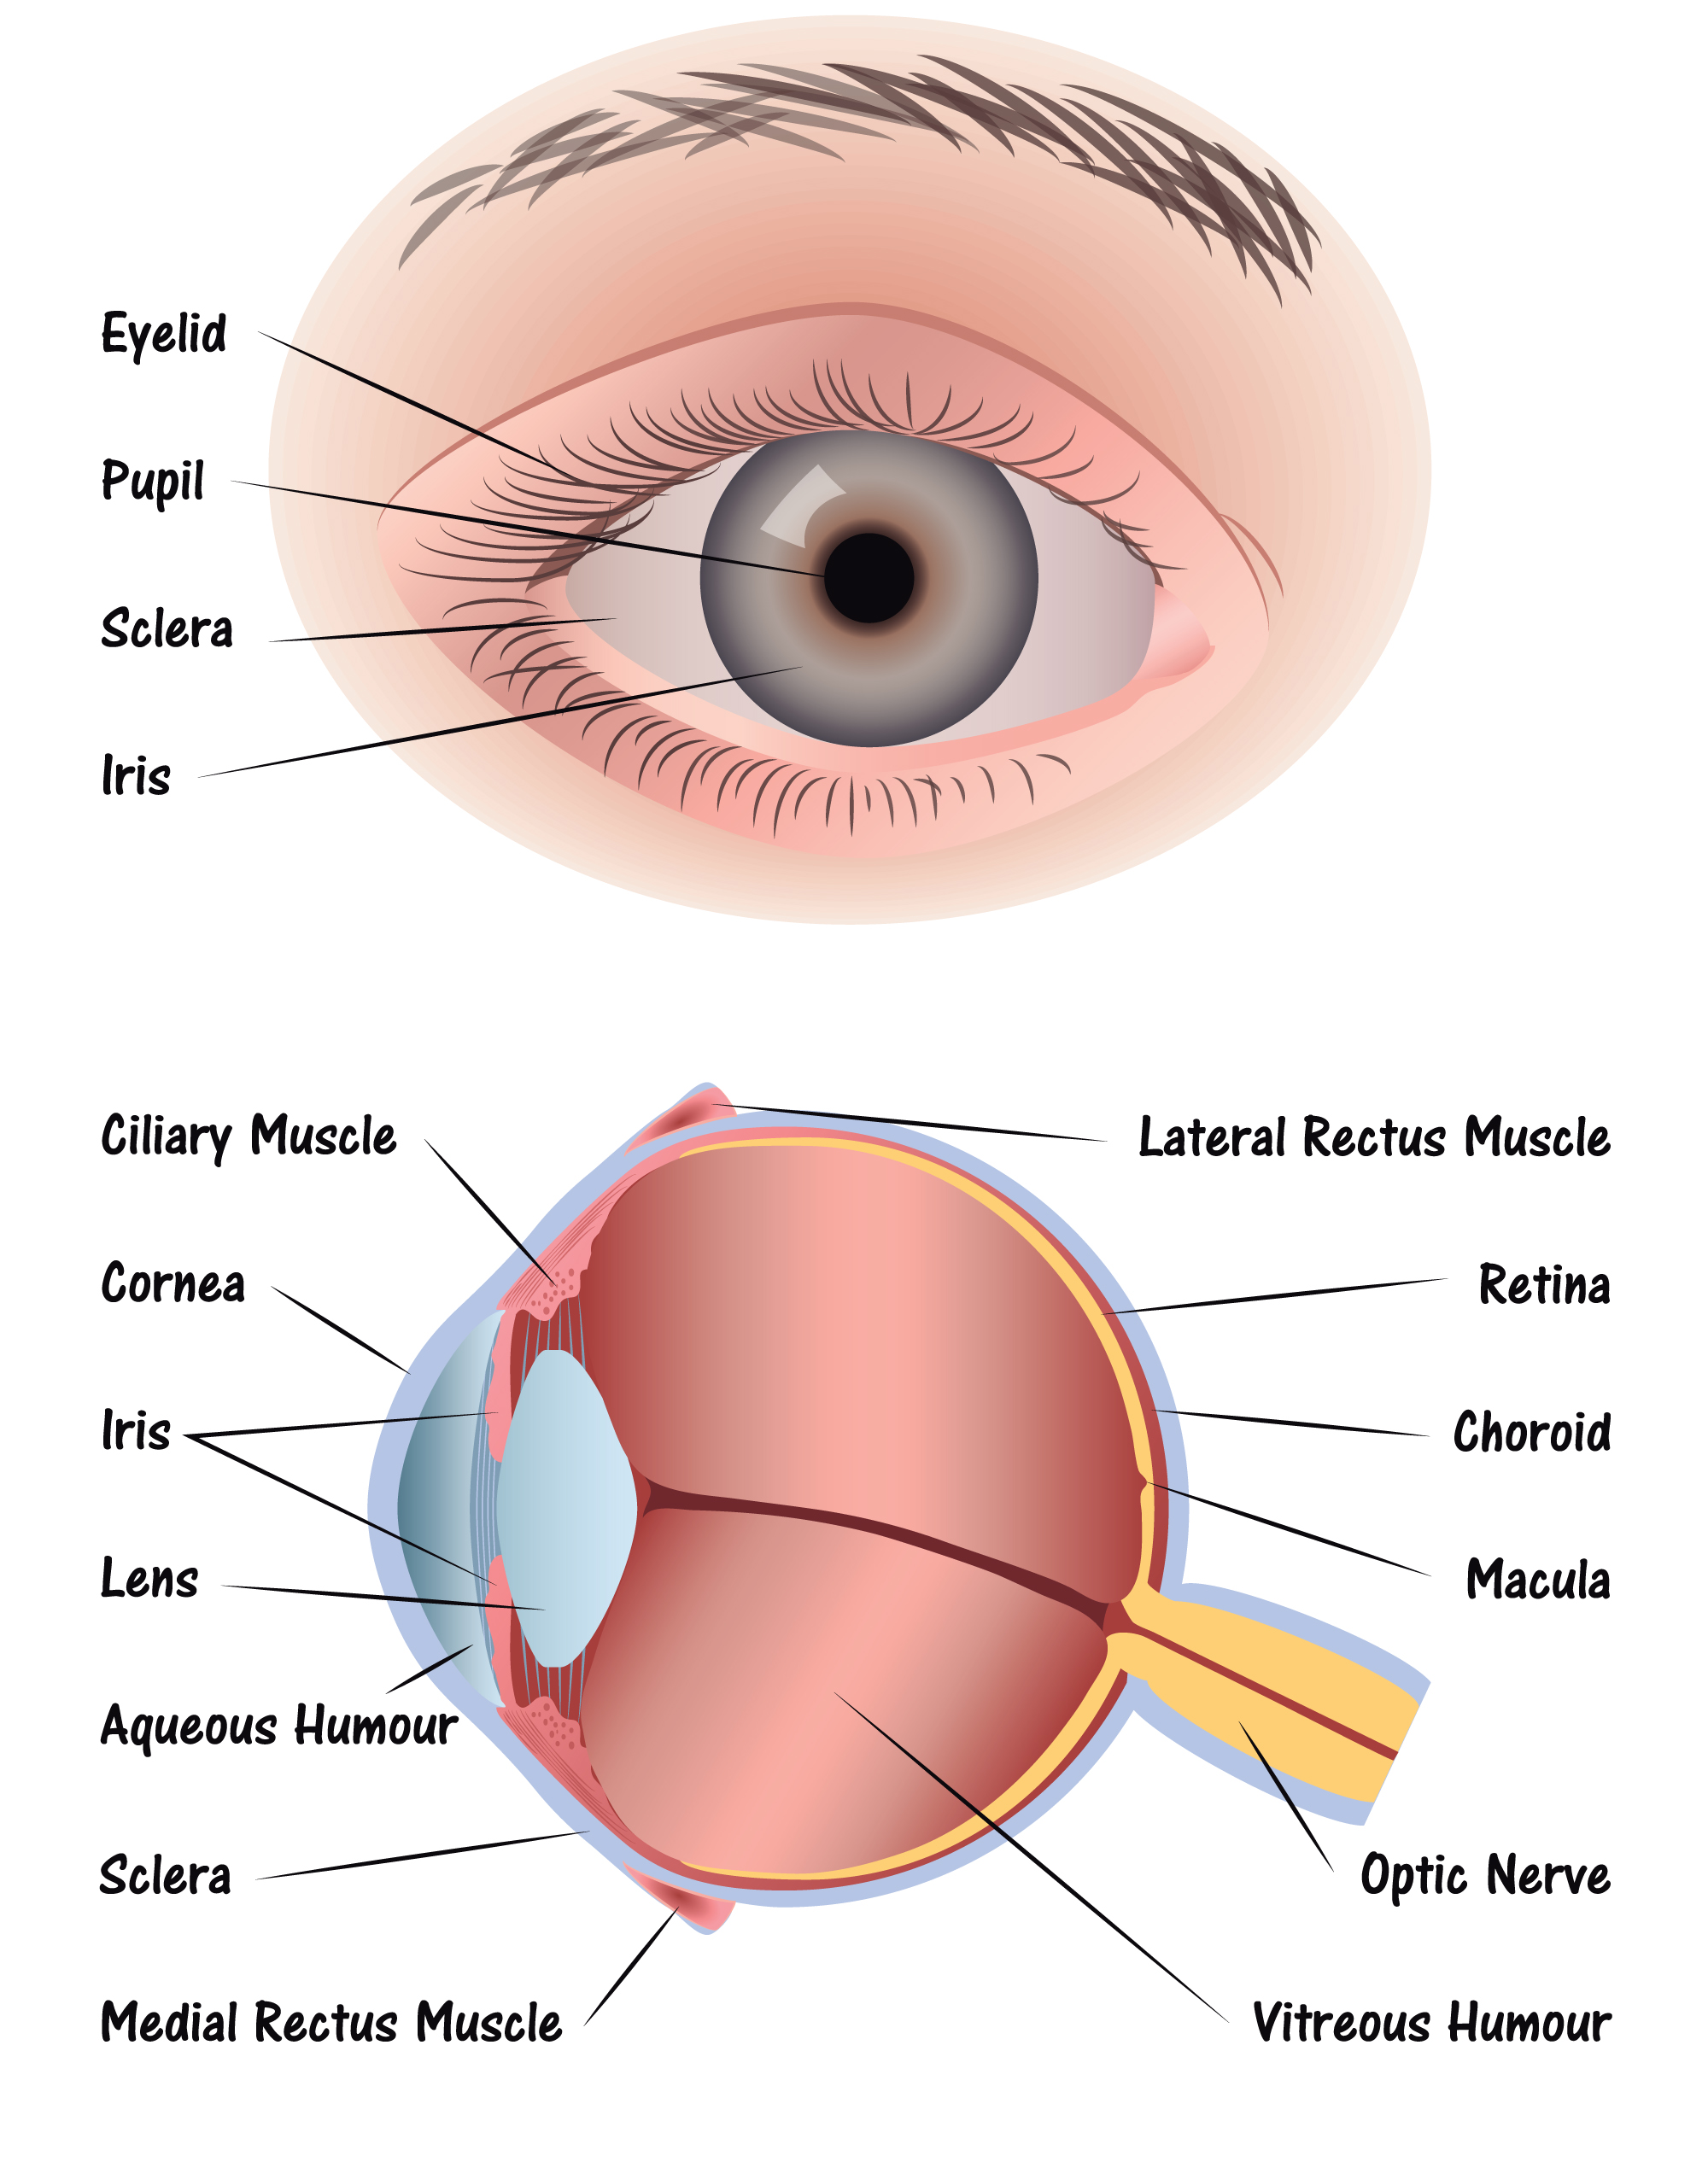 https://discoveryeye.org/wp-content/uploads/2020/02/eye-diagram.png